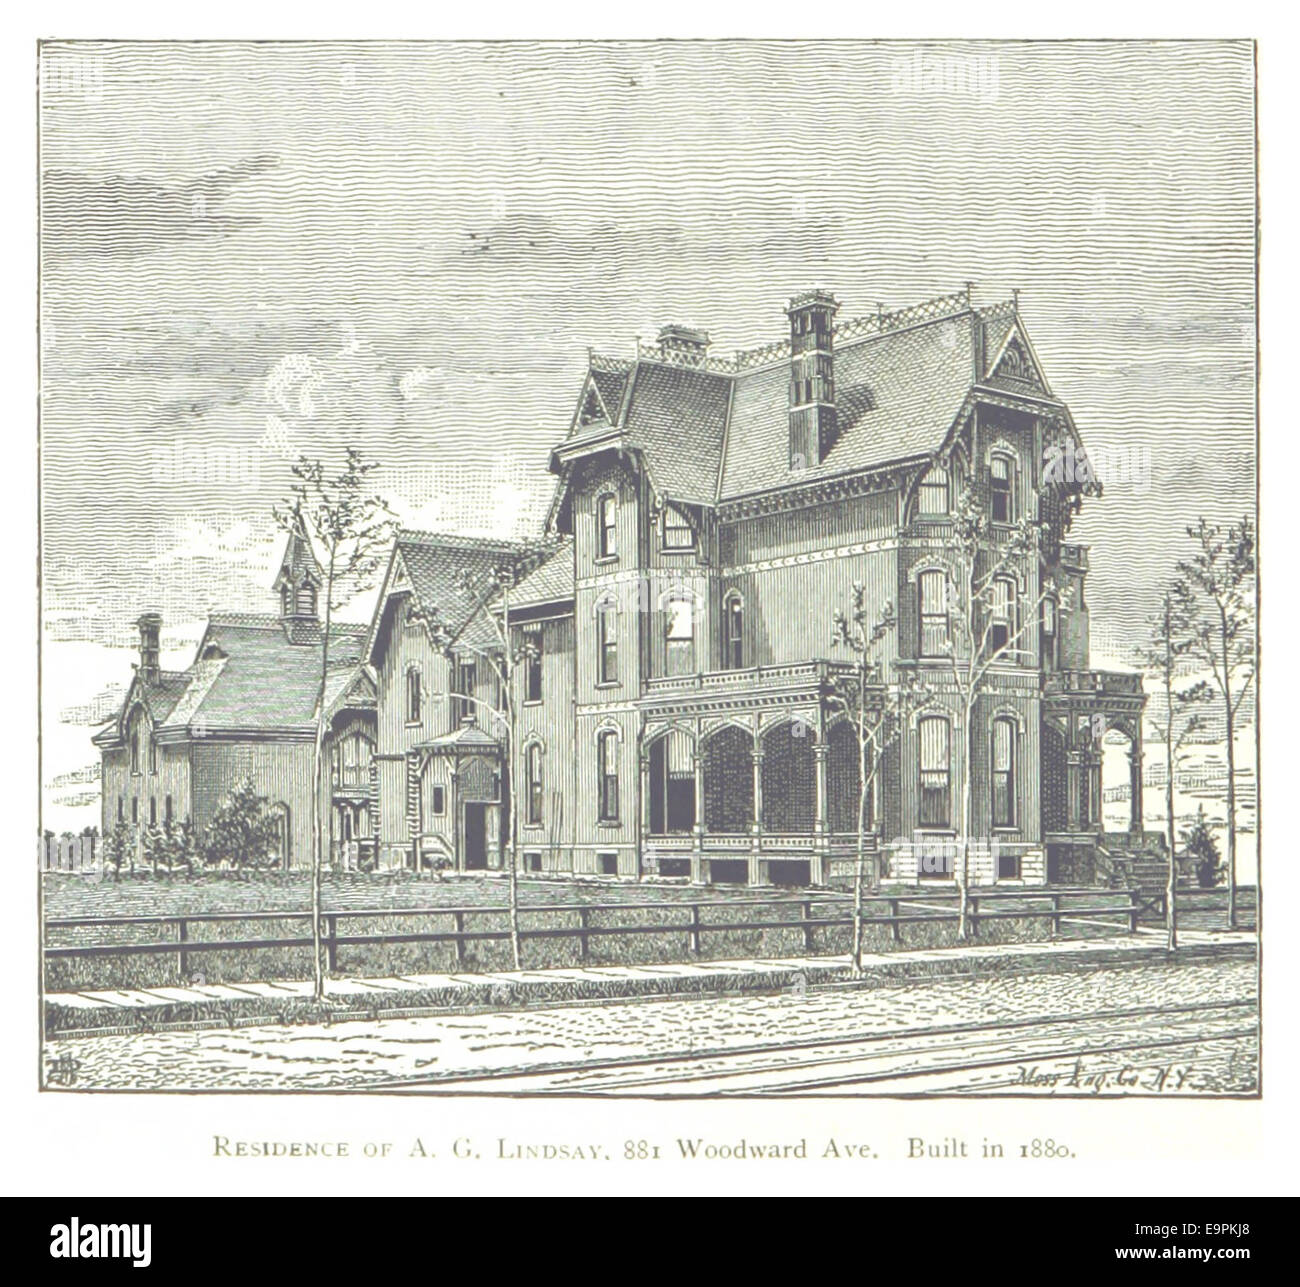 FARMER(1884) Detroit, p486 RESIDENCE OF A.G. LINDSAY, 881 WOODWARD AVE. BUILT IN 1880 Stock Photo